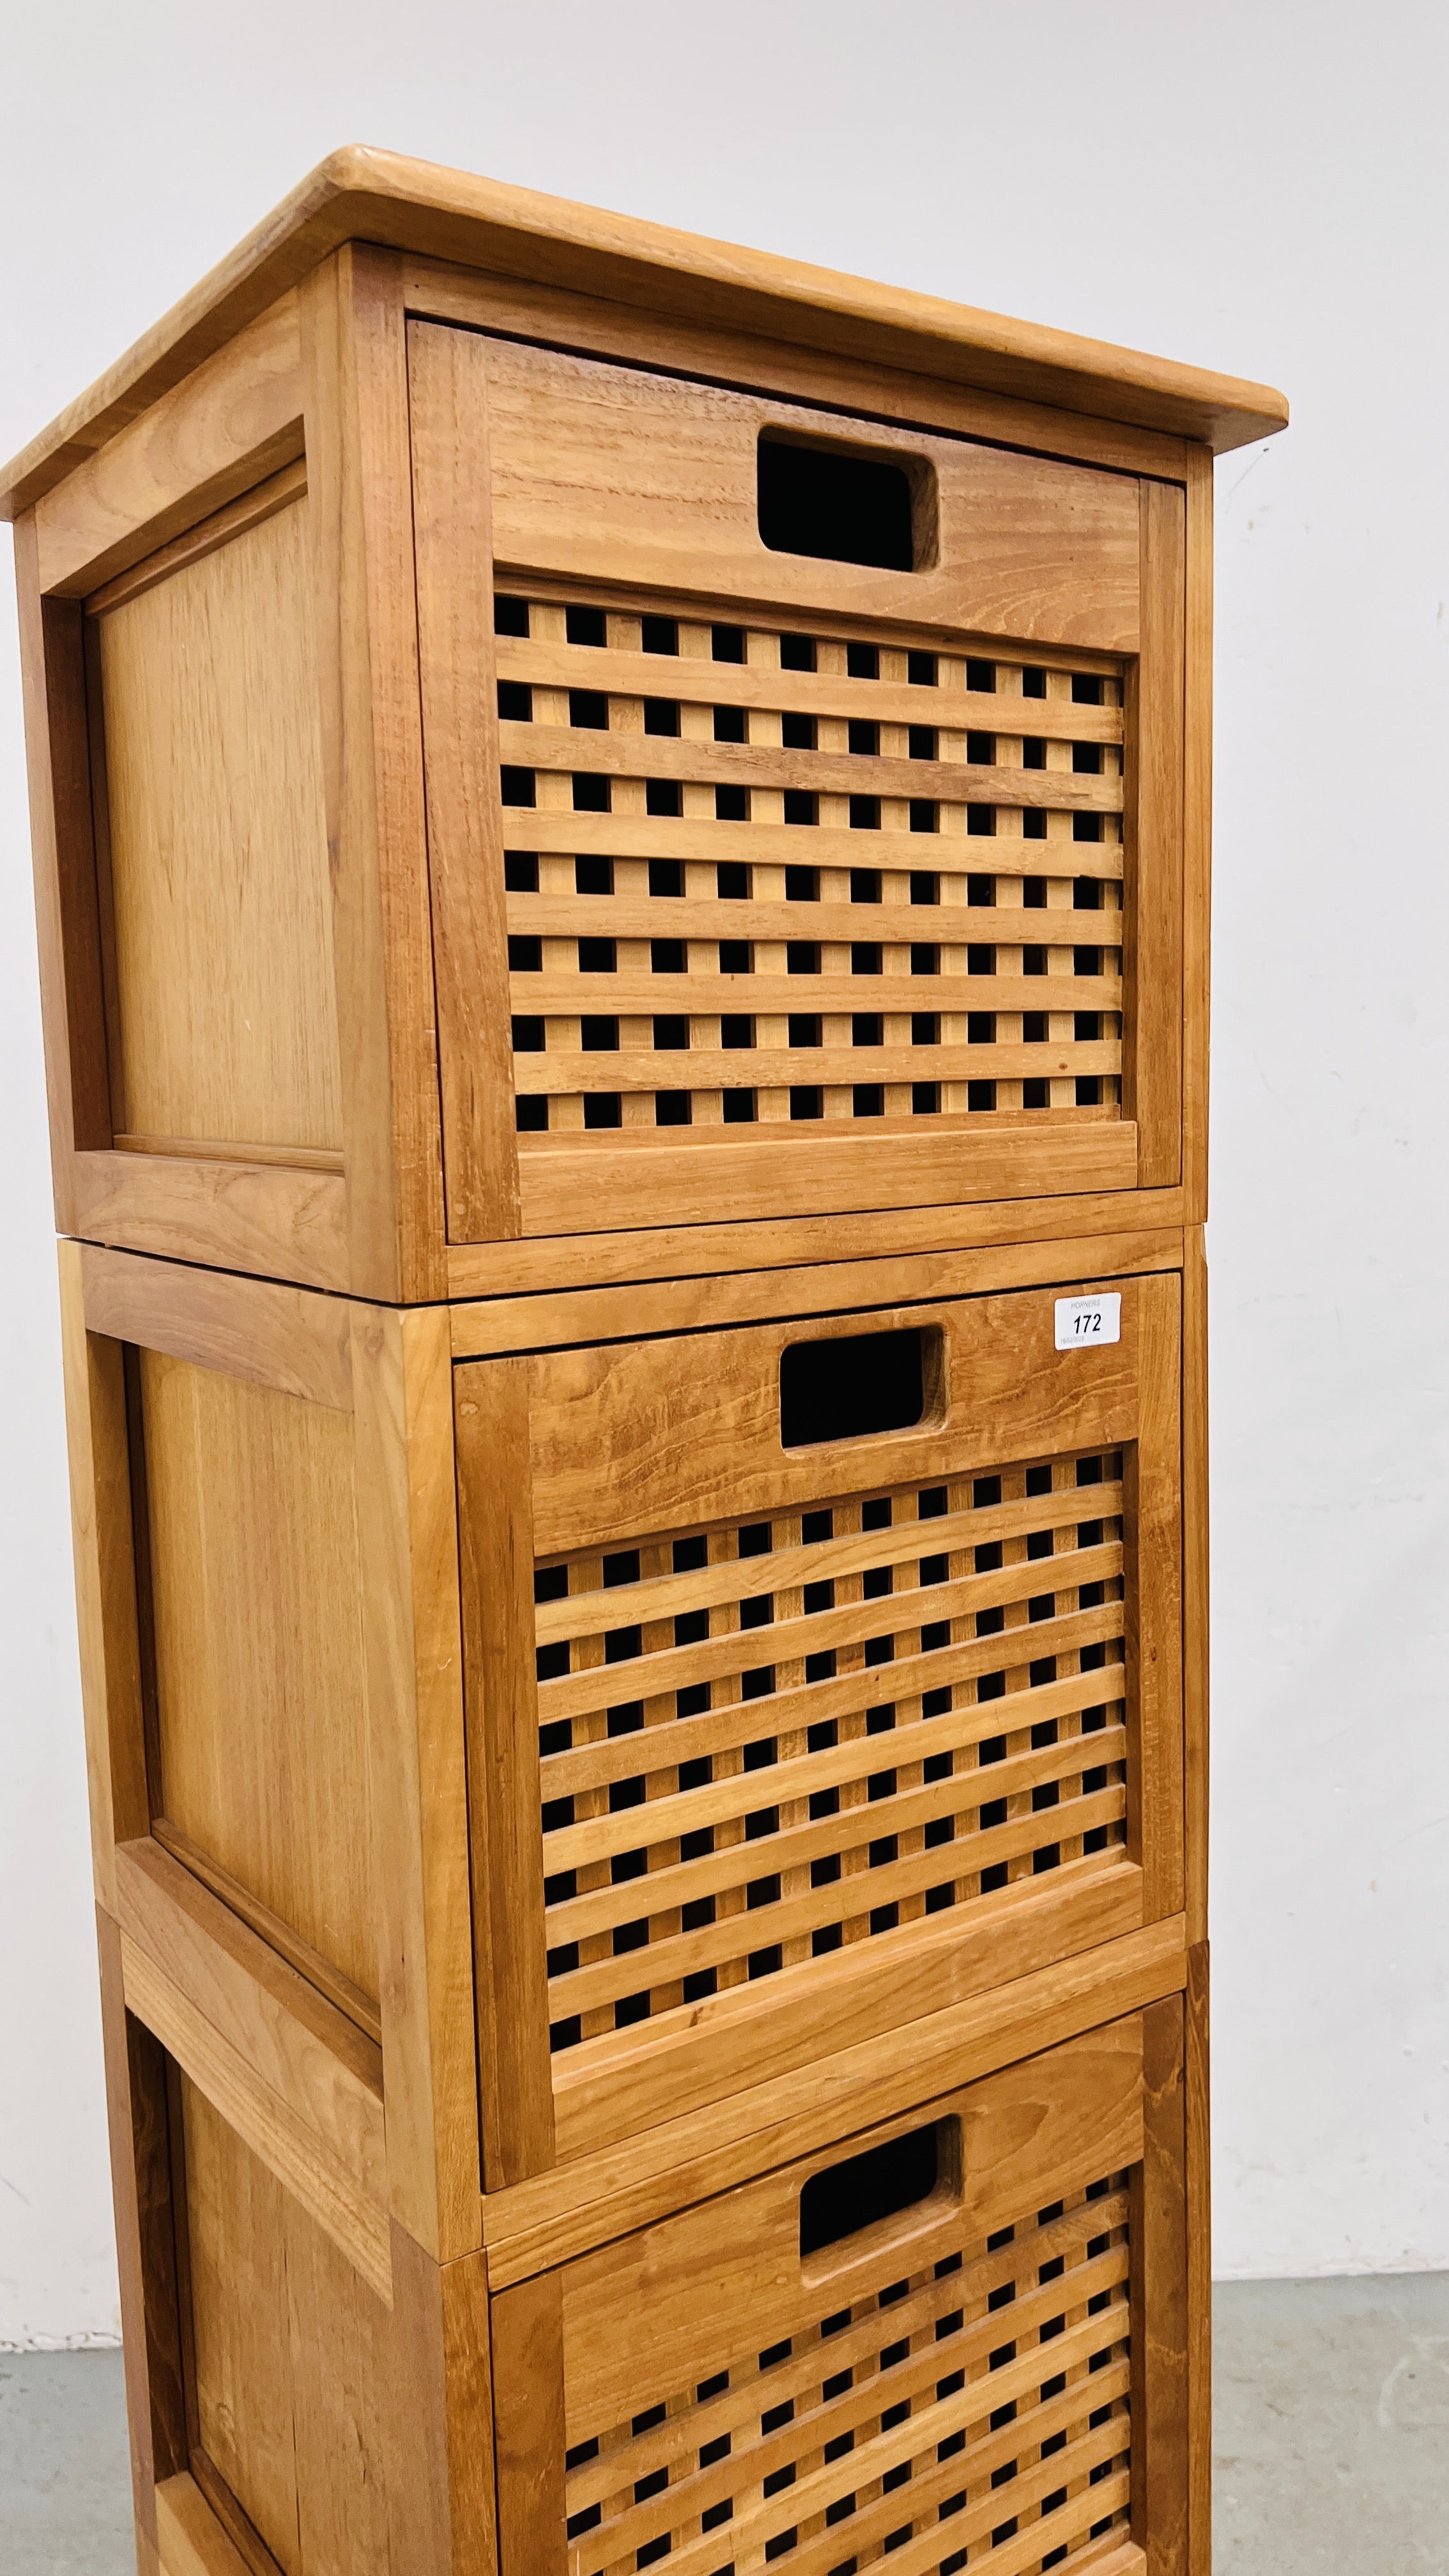 A 5 SECTION WOODEN SLATTED FRONT STACKING DRAWER TOWER. 1 DRAWER A/F - W 43CM. X H 171CM. X D 41CM. - Image 4 of 6